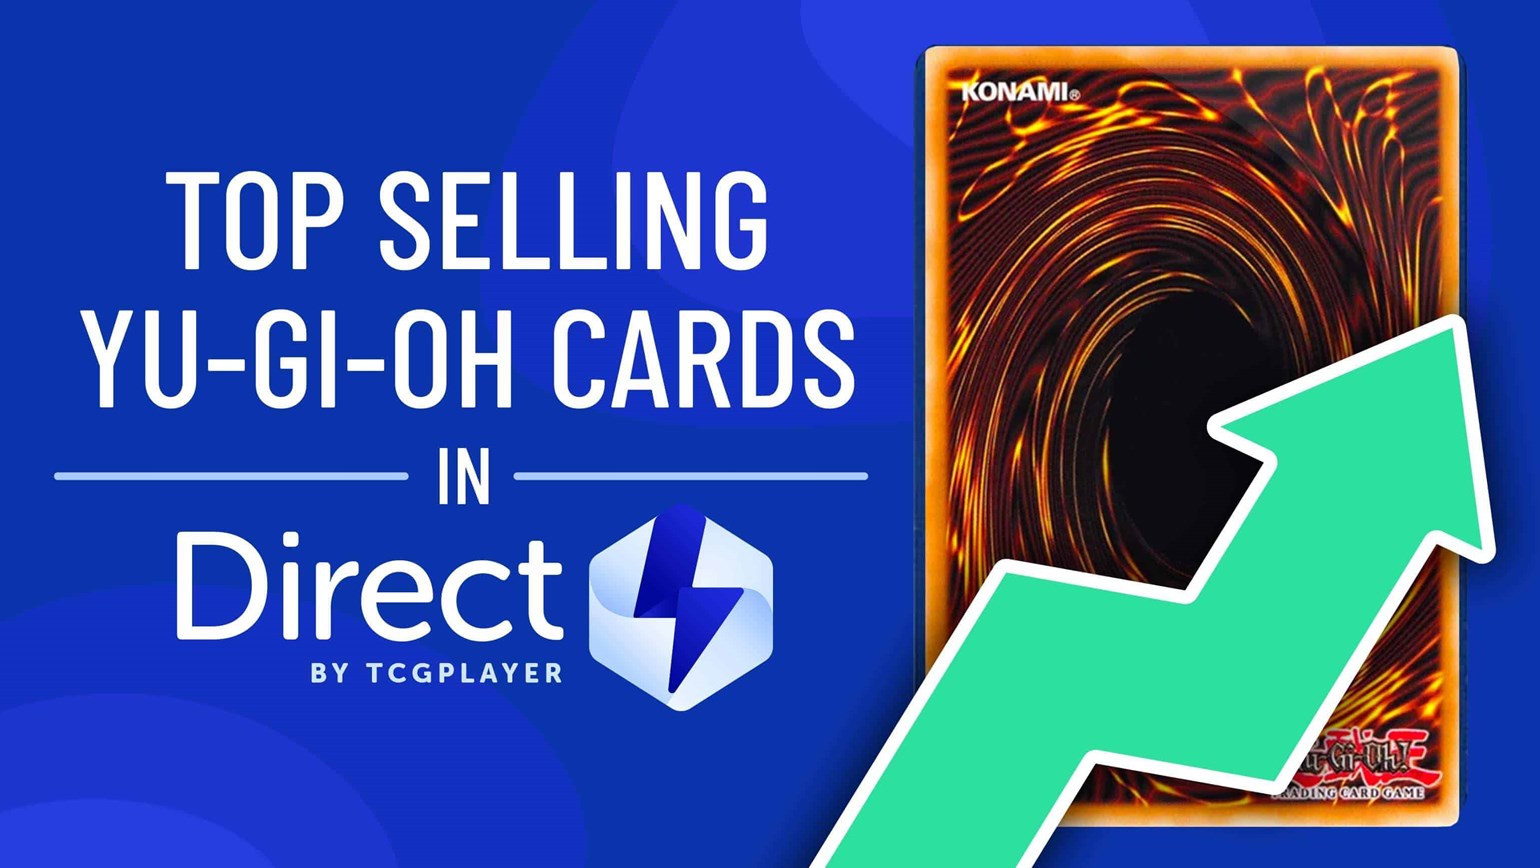 July Top Selling Yu-Gi-Oh! Cards Under $25 in Direct by TCGplayer